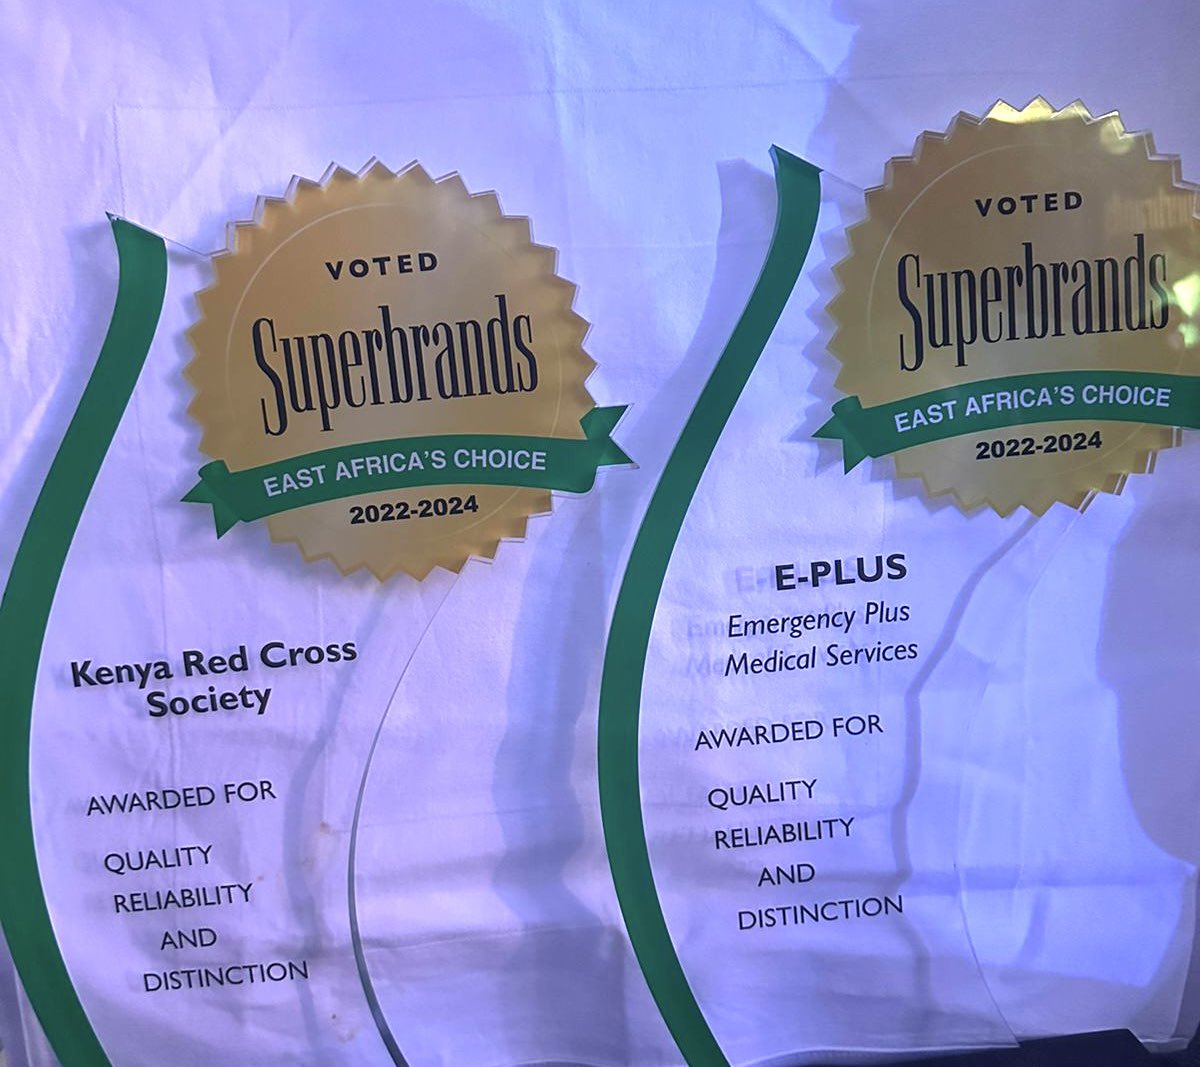 Delighted to receive on behalf of volunteers & staff of @KenyaRedCross, the recognition of the orgn as a #Superbrand. A double win as our ambulance company @EMS_Kenya also recognised as a superbrand by @SuperbrandsEA for our work in providing life saving services.